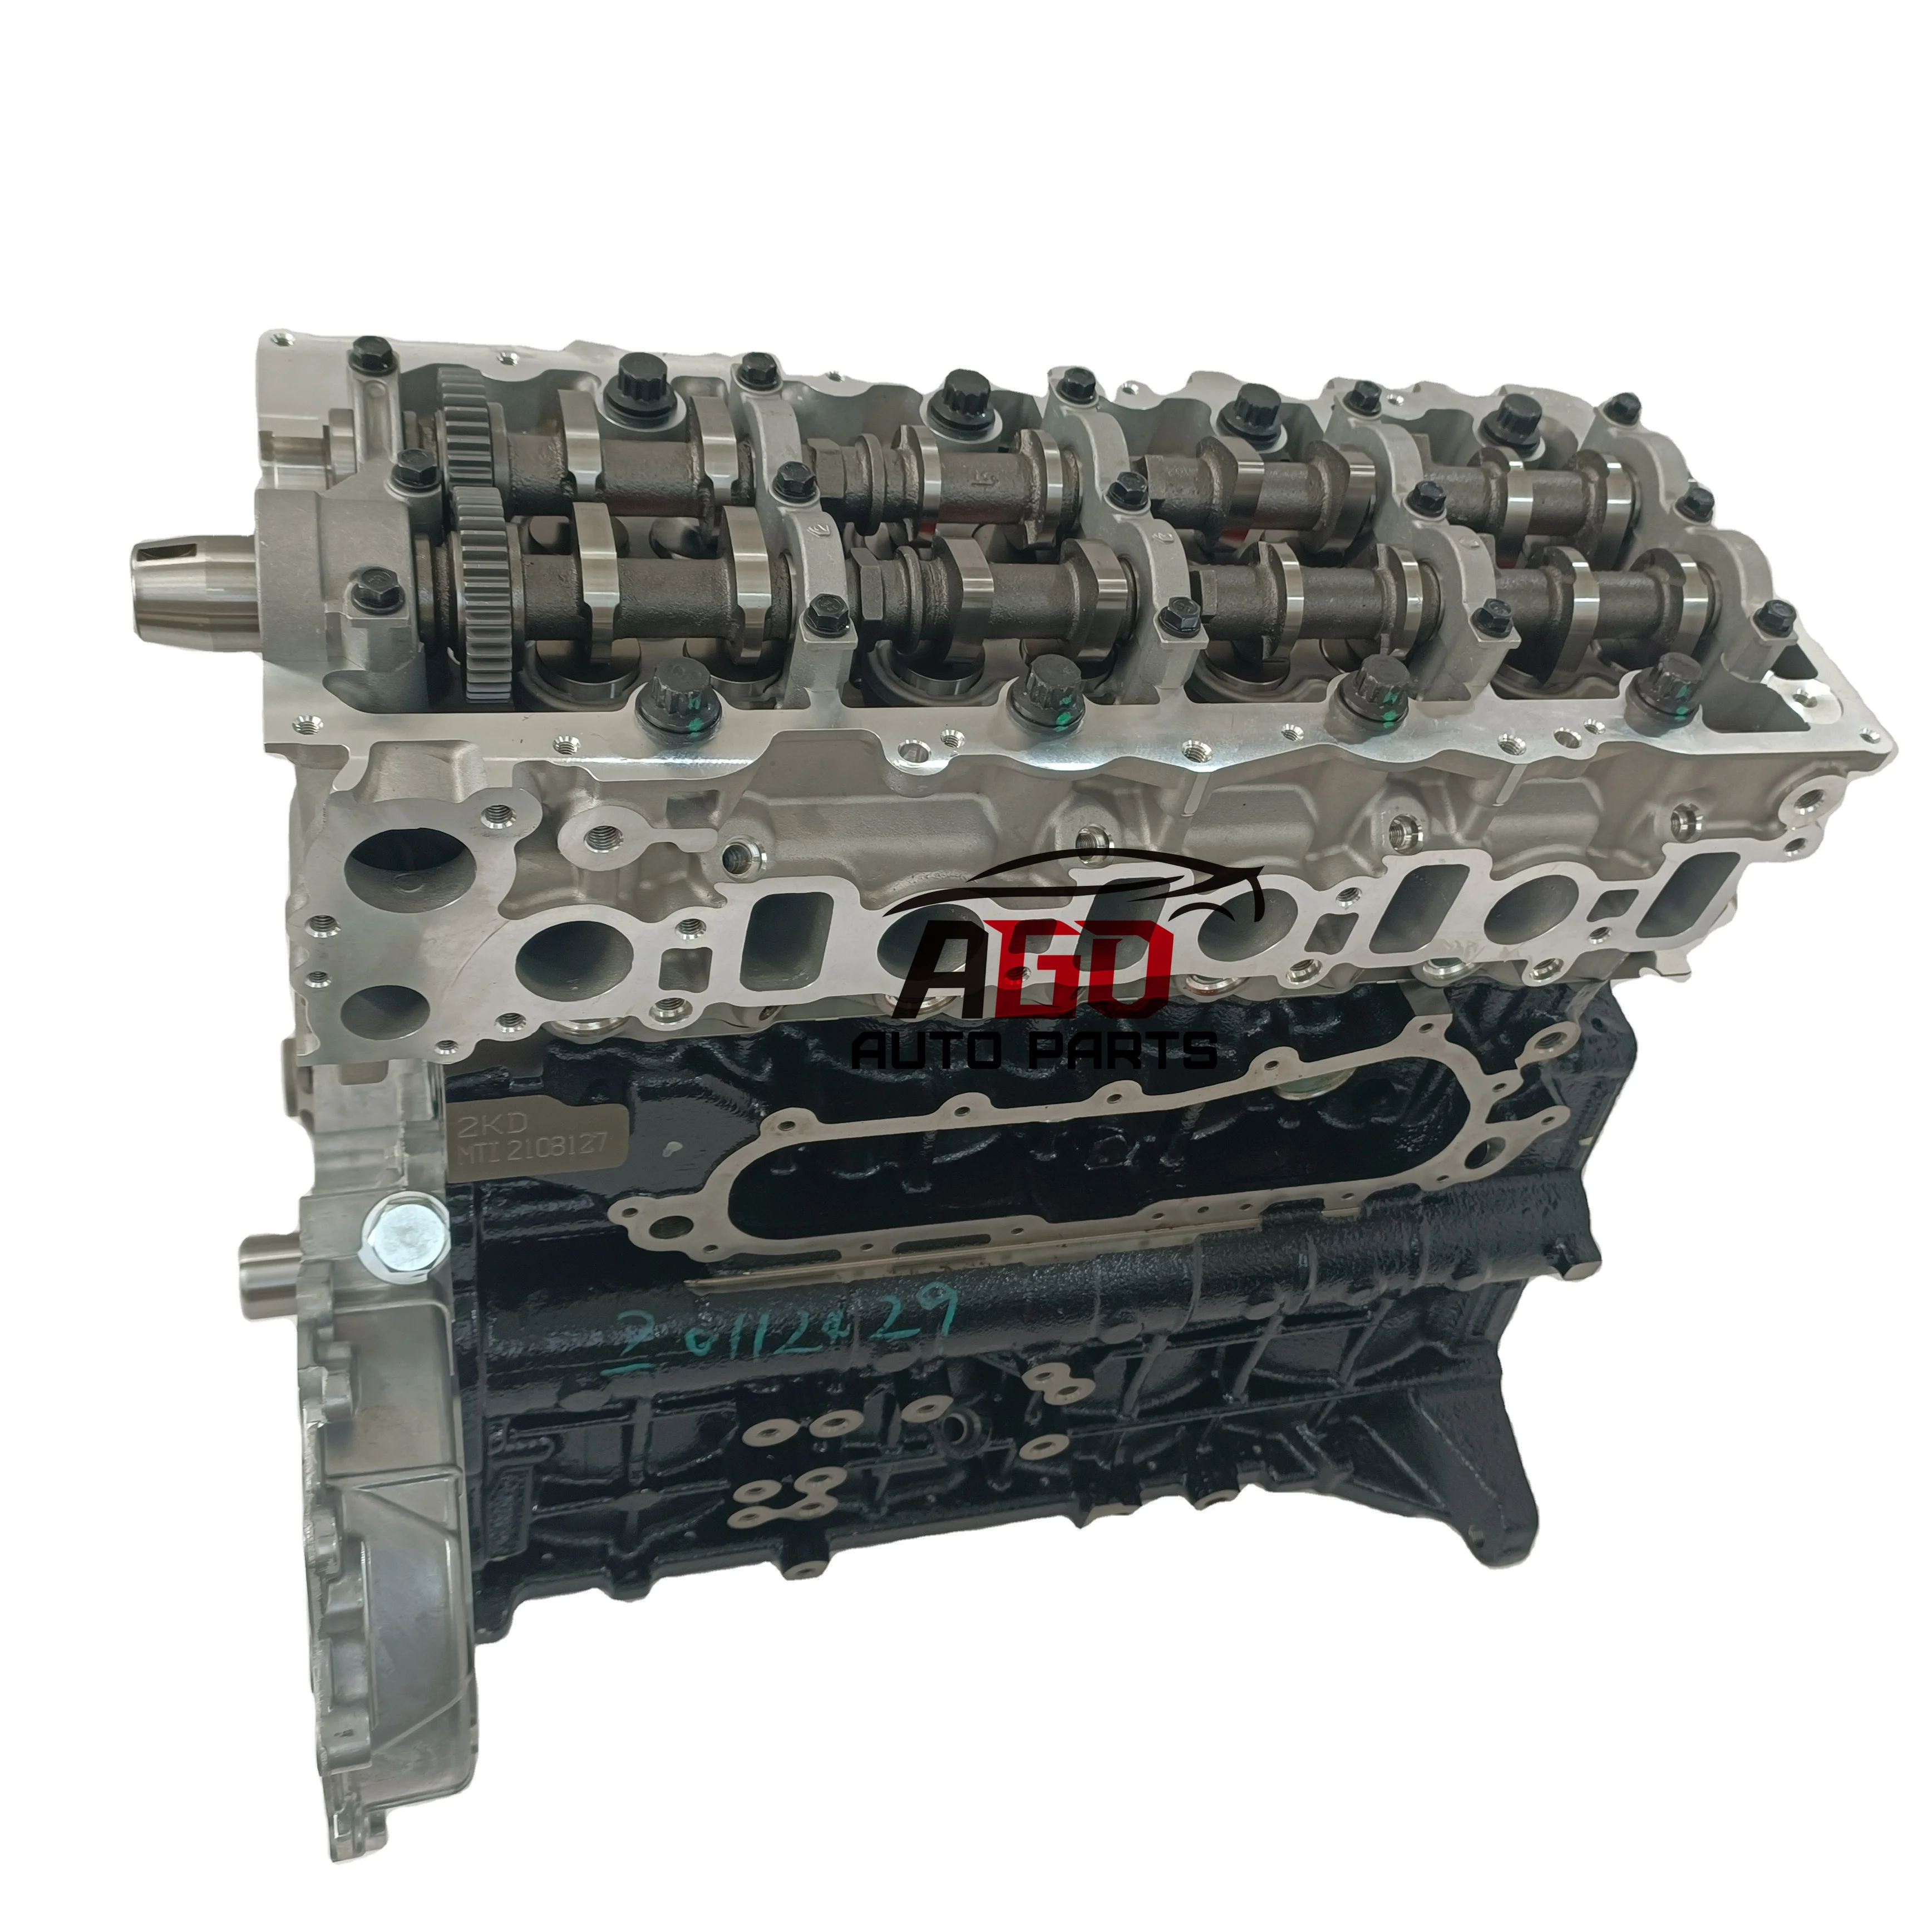 AGO Ready to ship 1KD 2KD 2KD FTV Engine Long Block Diesel Engine for Toyota Hilux HIACE ZD25 DK4 KD4B 2KD Complete Engine New